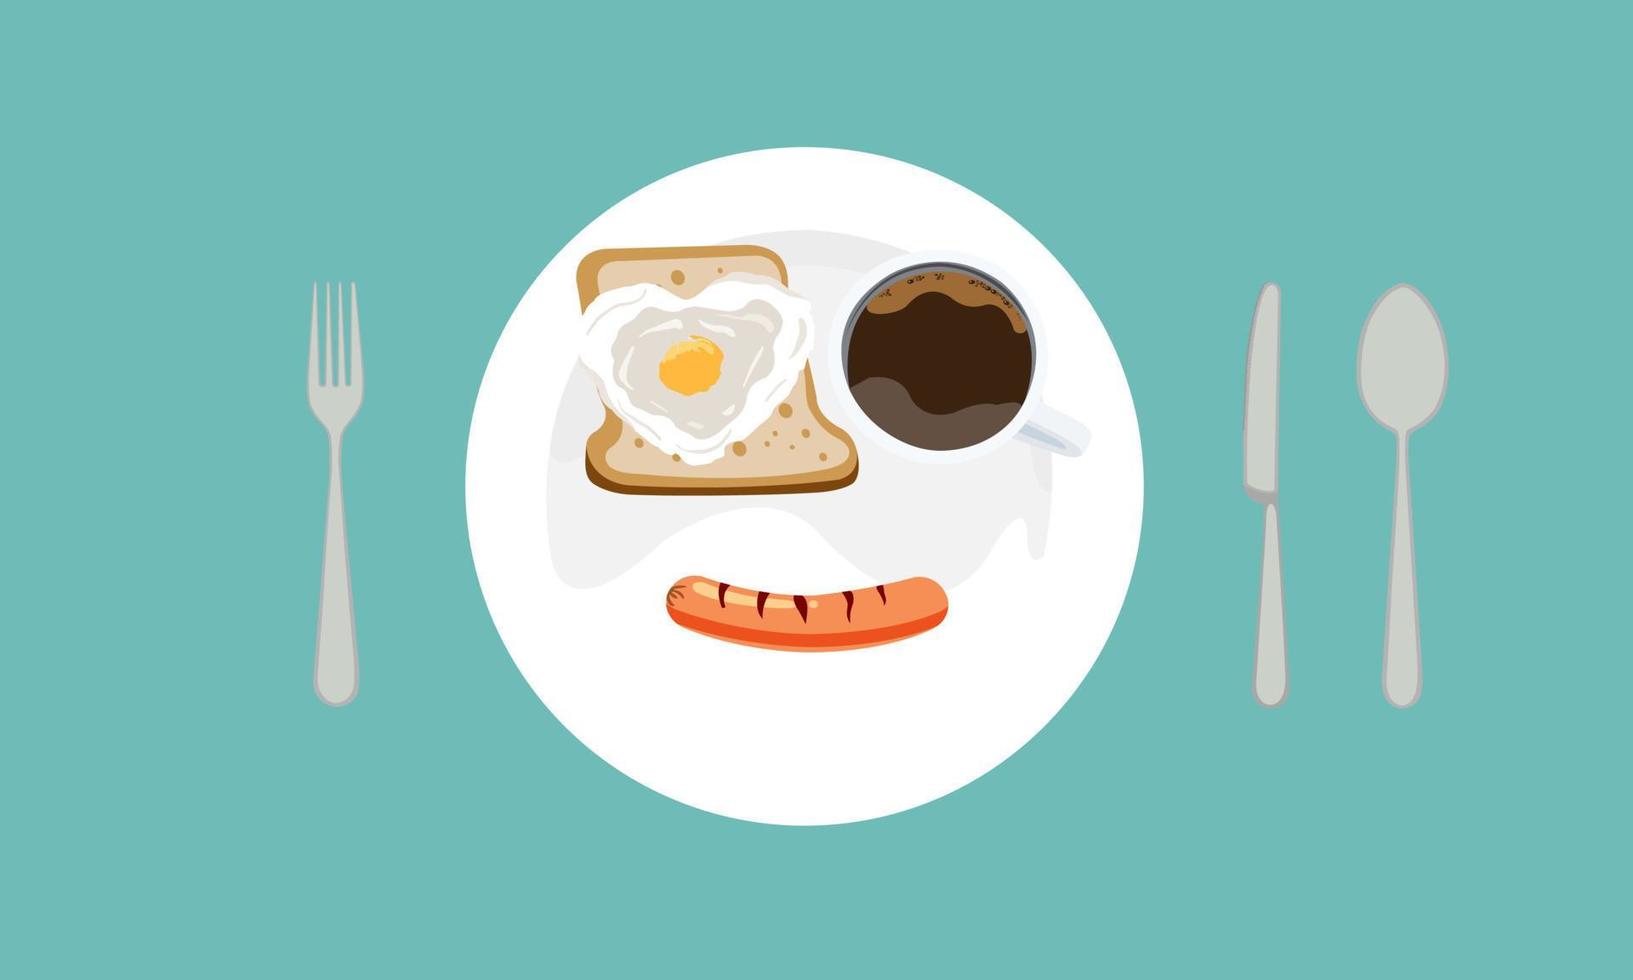 Sausage, toast, fried egg, heart shape and coffee on a plate. Delicious breakfast concept. vector